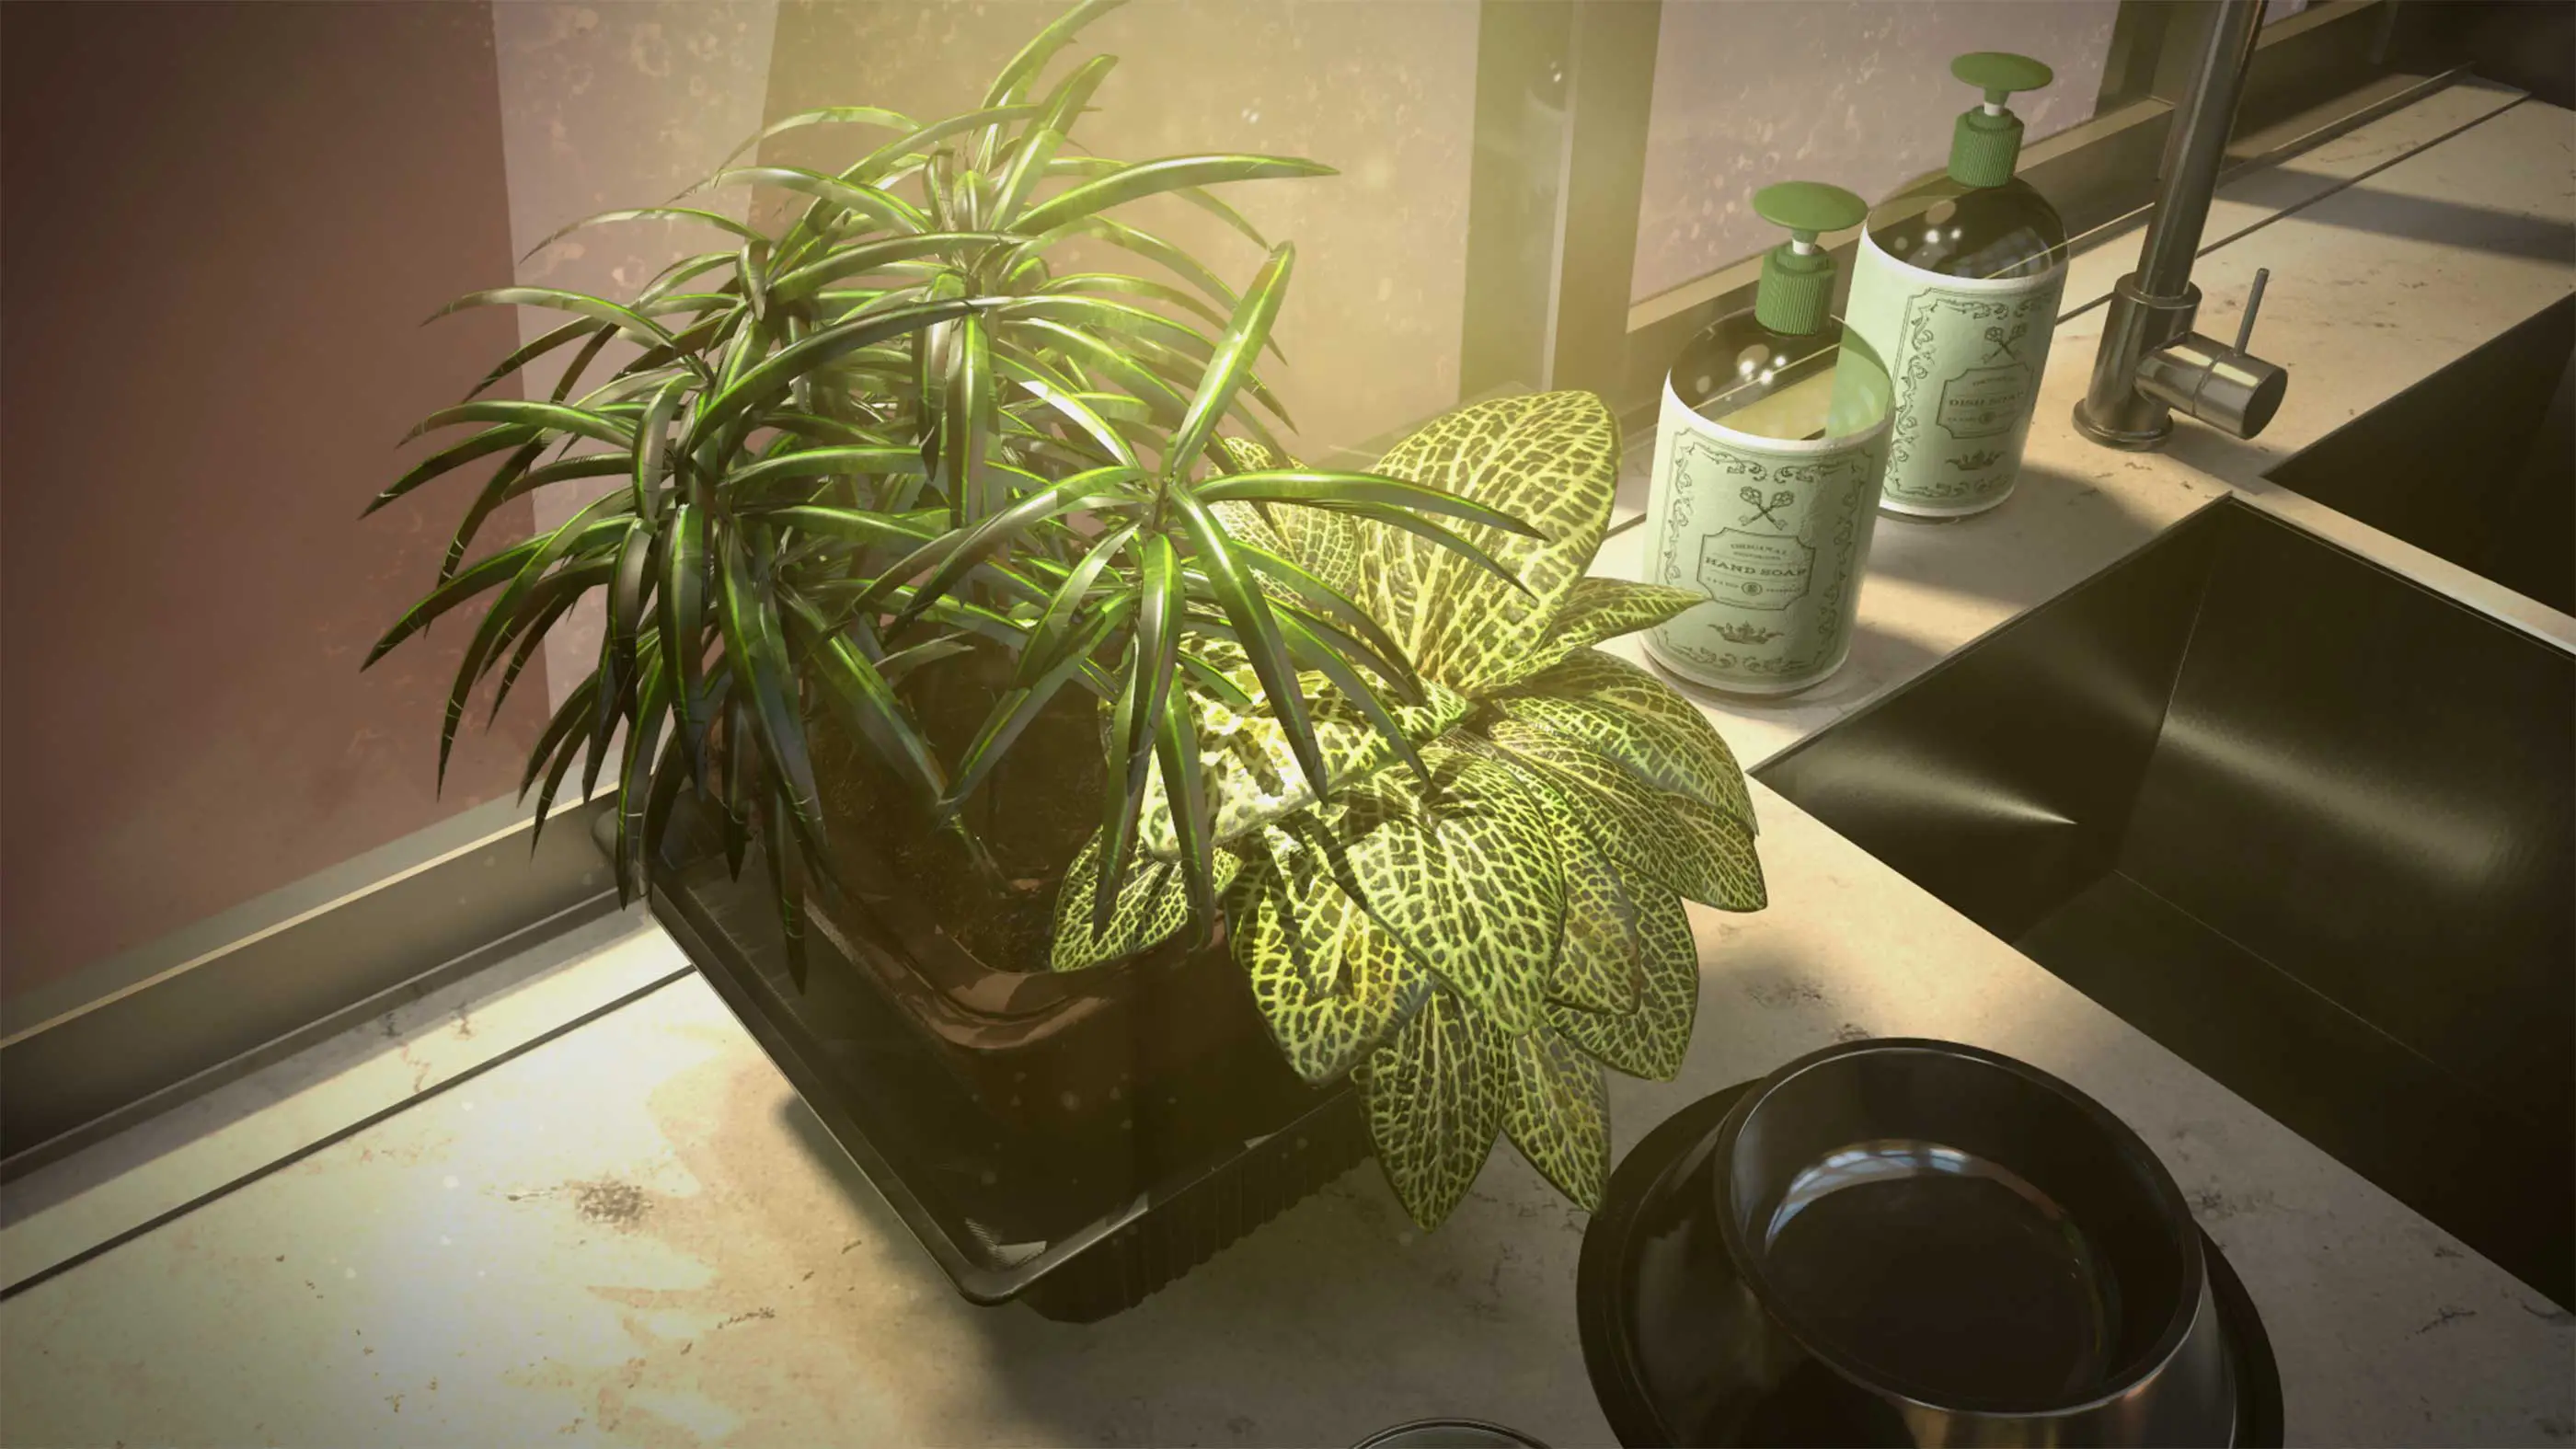 A 3D render of a plant sitting next to a kitchen sink.